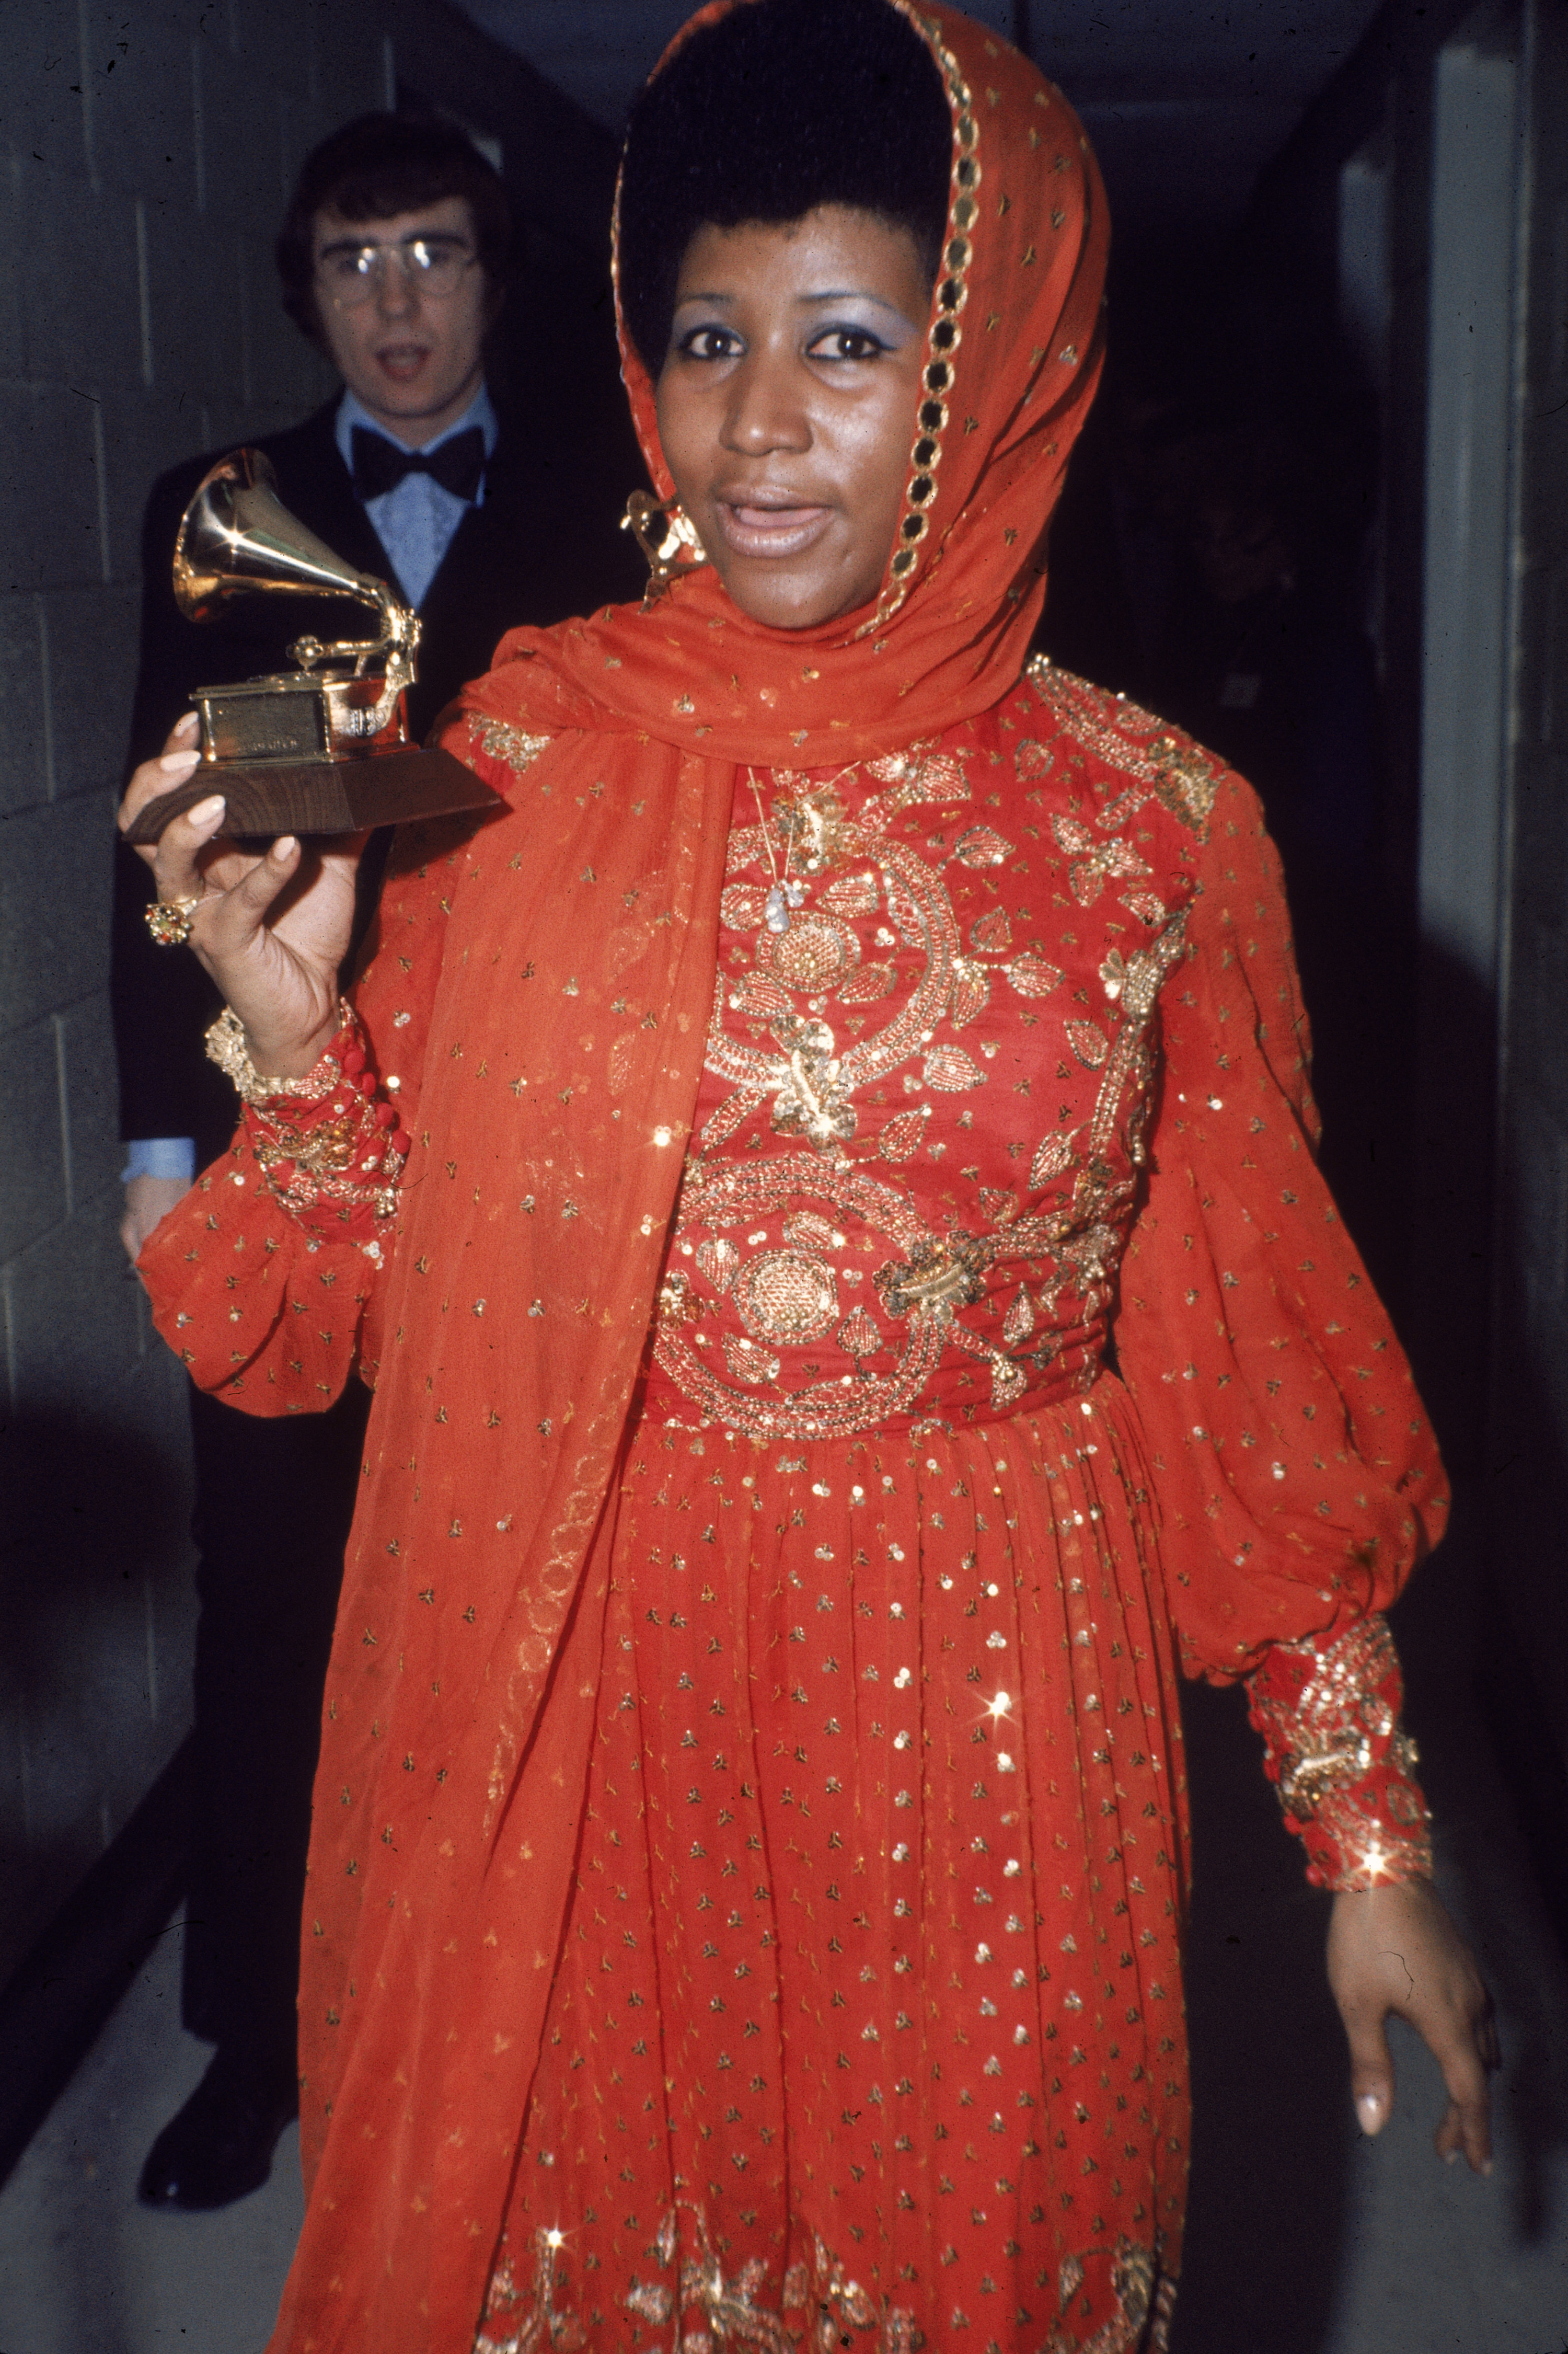 American soul singer Aretha Franklin stands backstage wearing an gold embroidered gown and holding a Grammy Award,